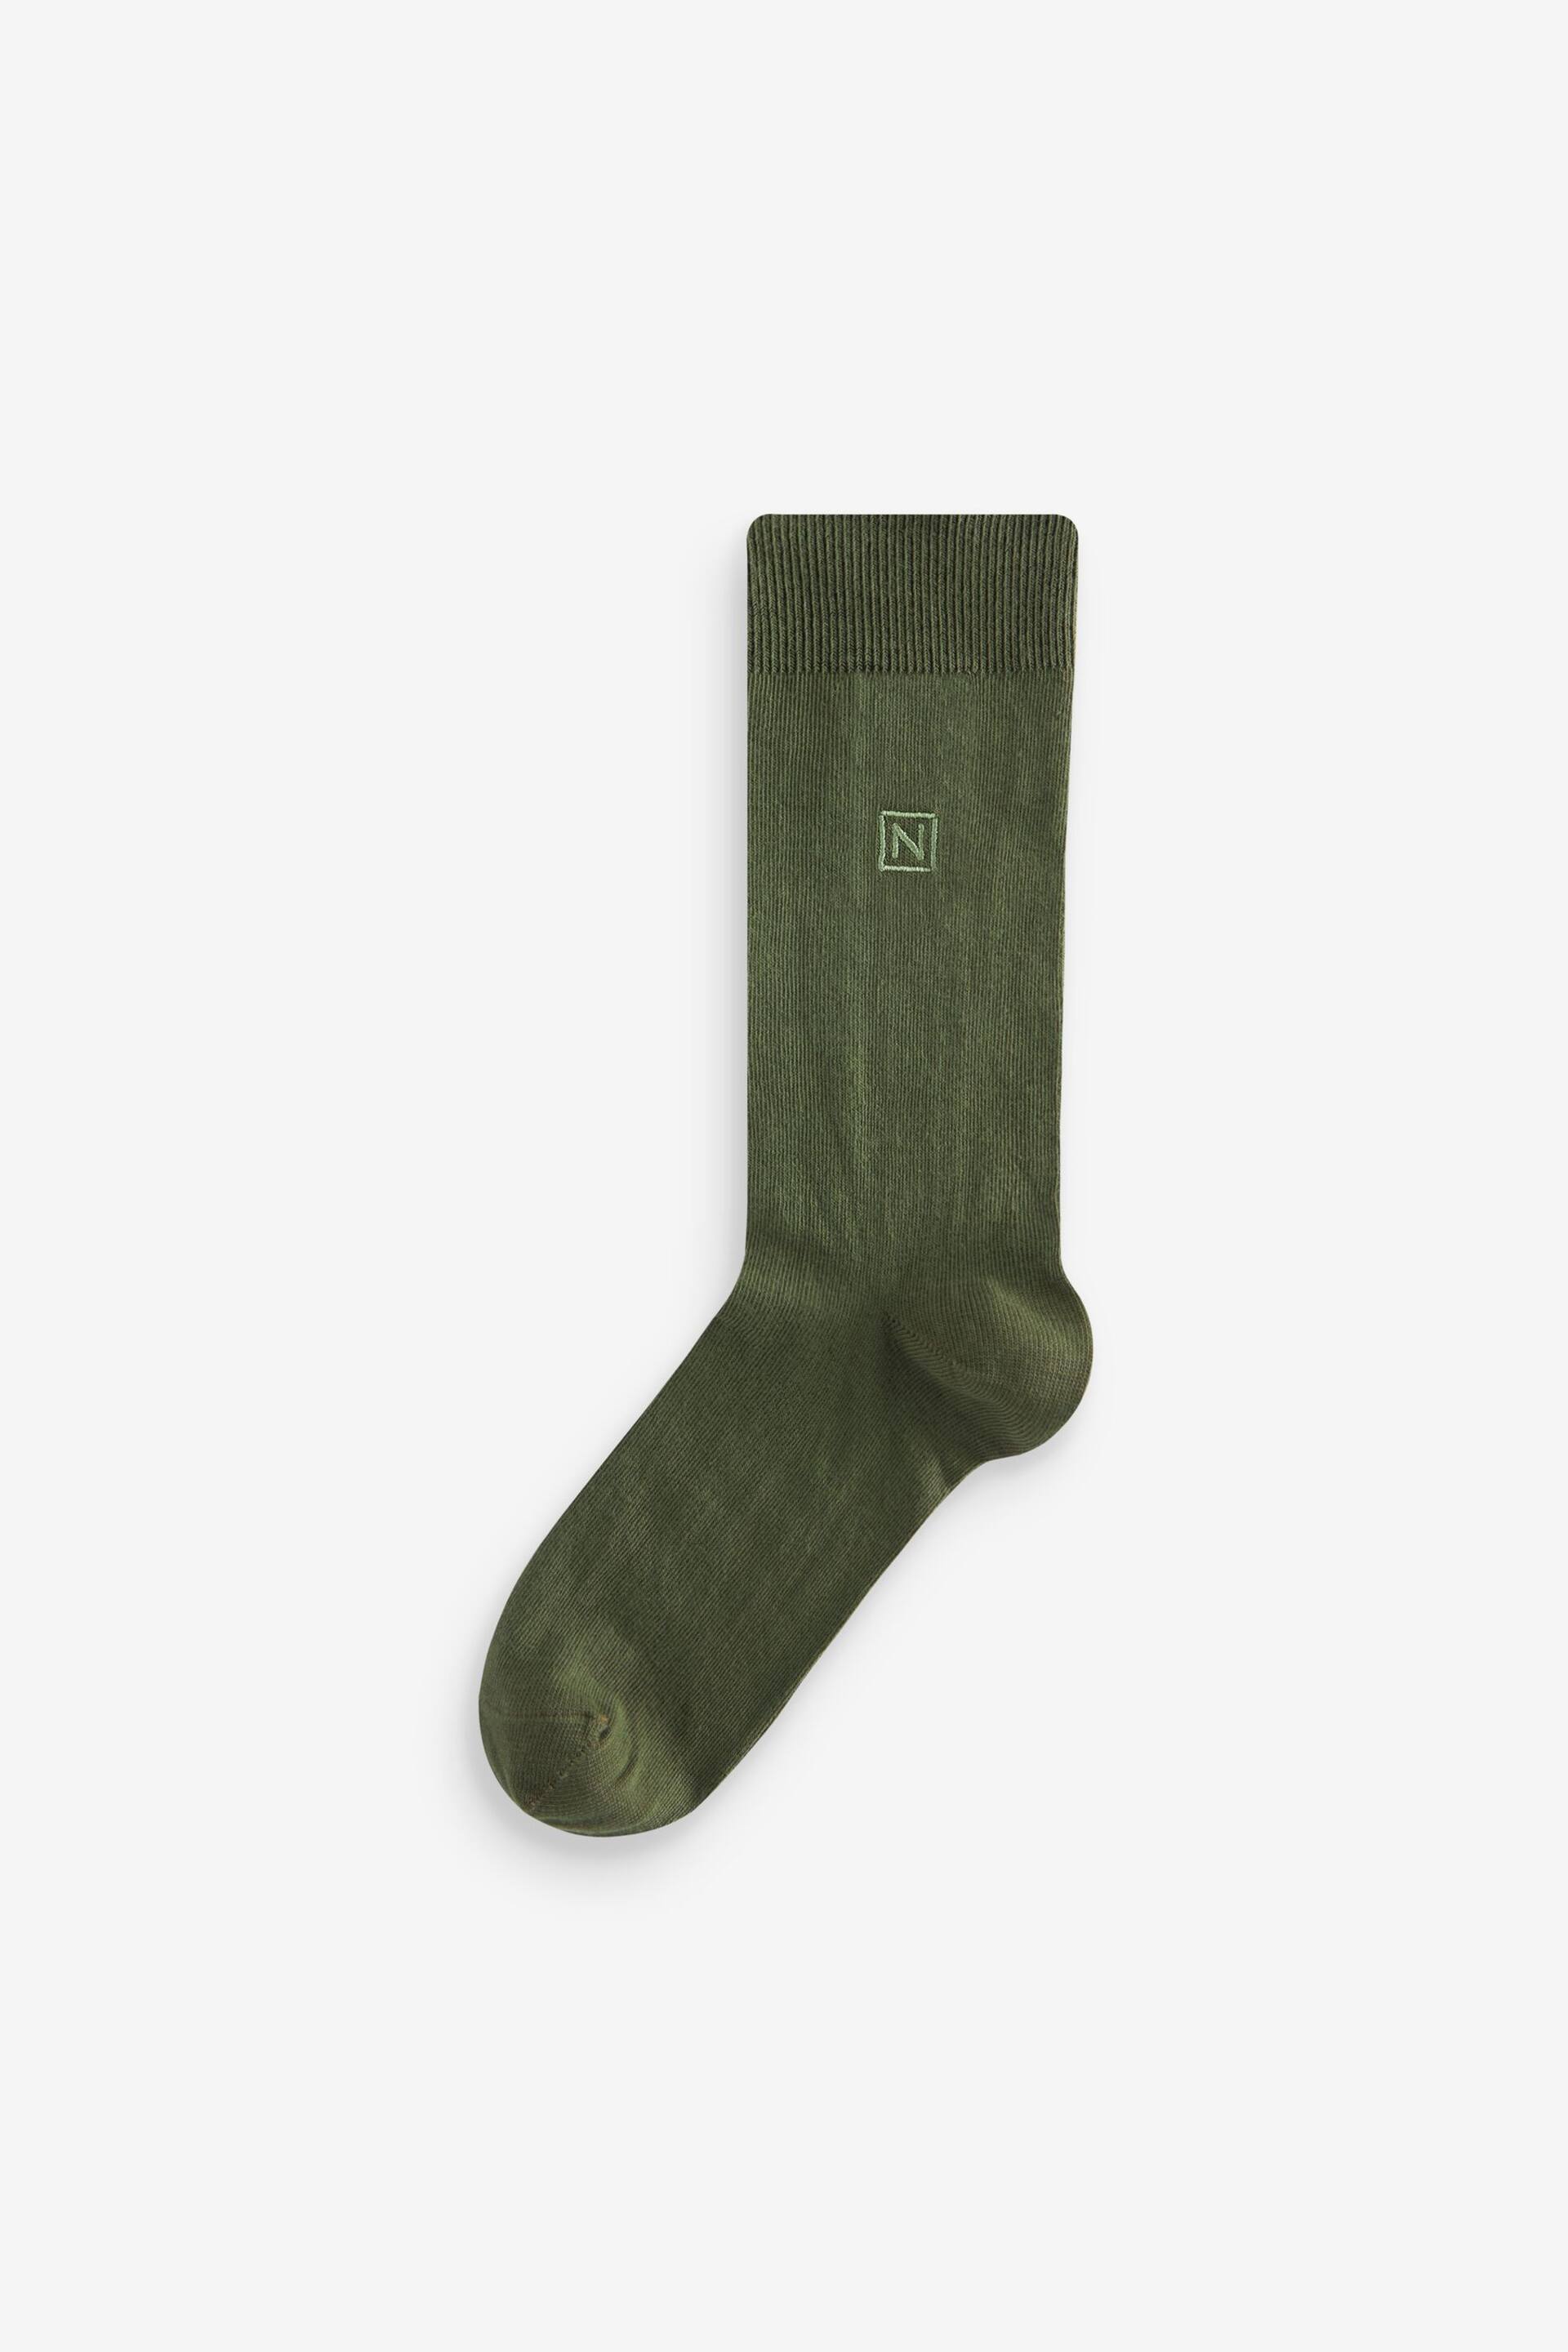 Blue/Grey/Green/Red 8 Pack Embroidered Lasting Fresh Socks - Image 5 of 9